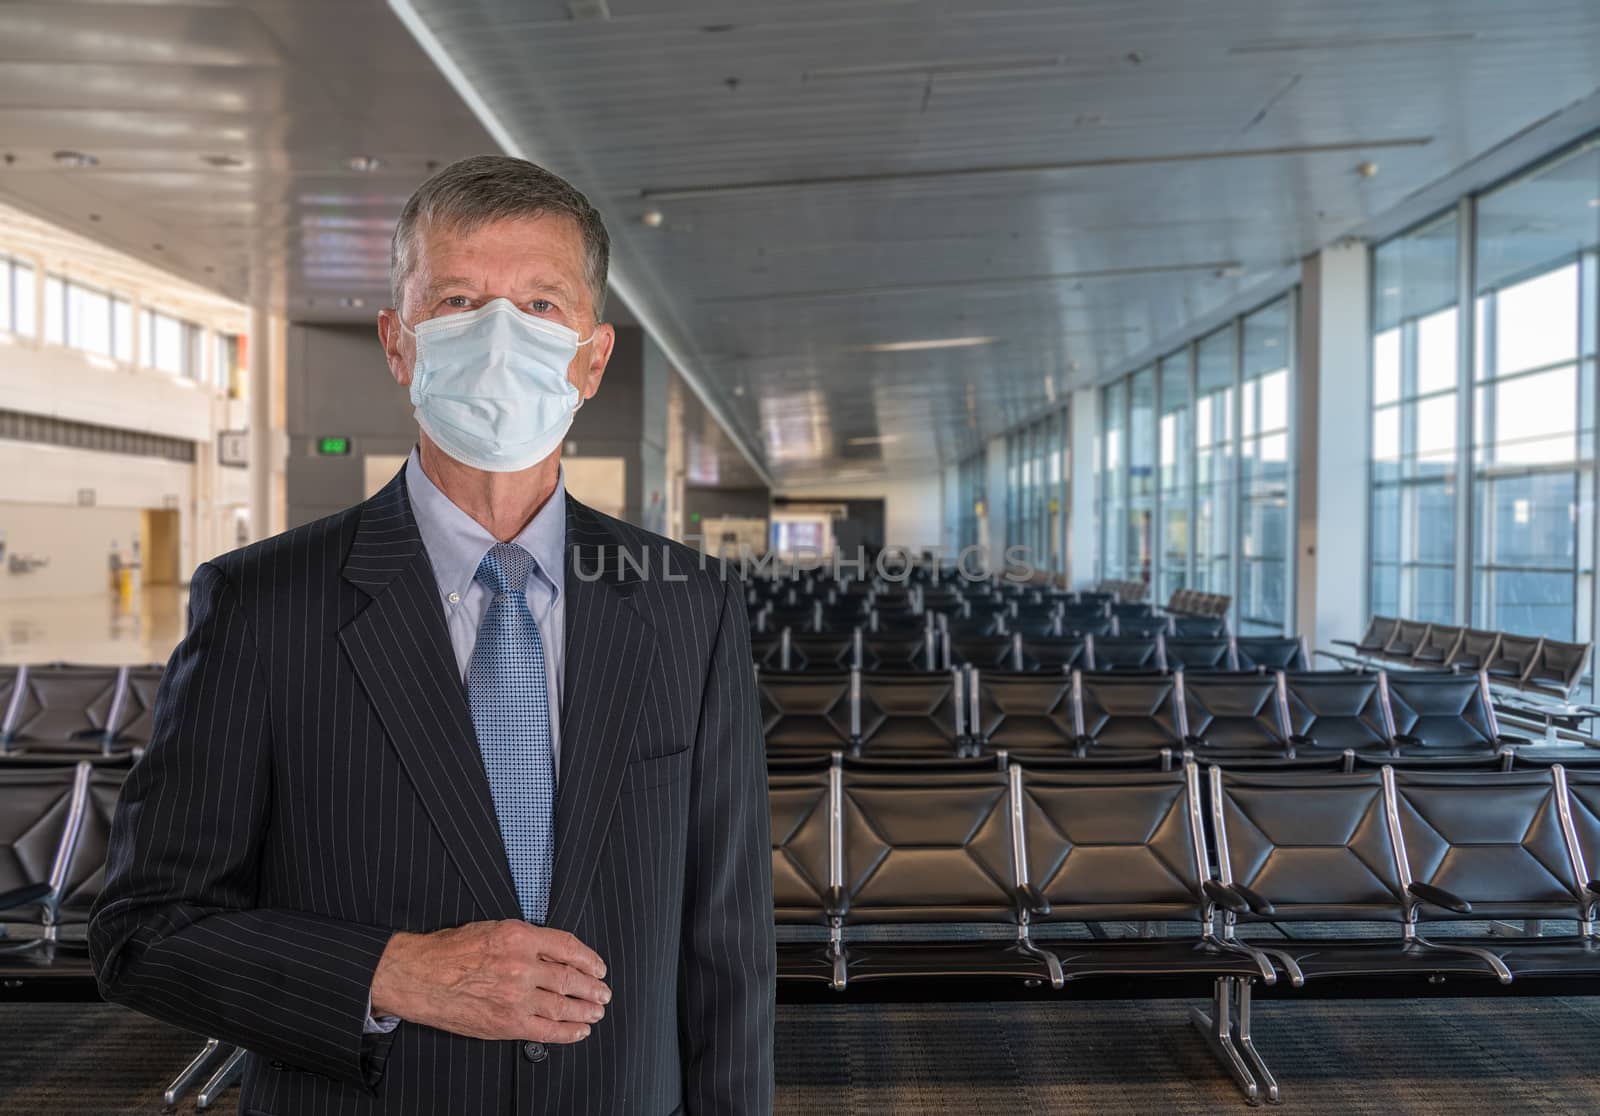 Senior adult businessman wearing a face mask against coronavirus in airport terminal by steheap